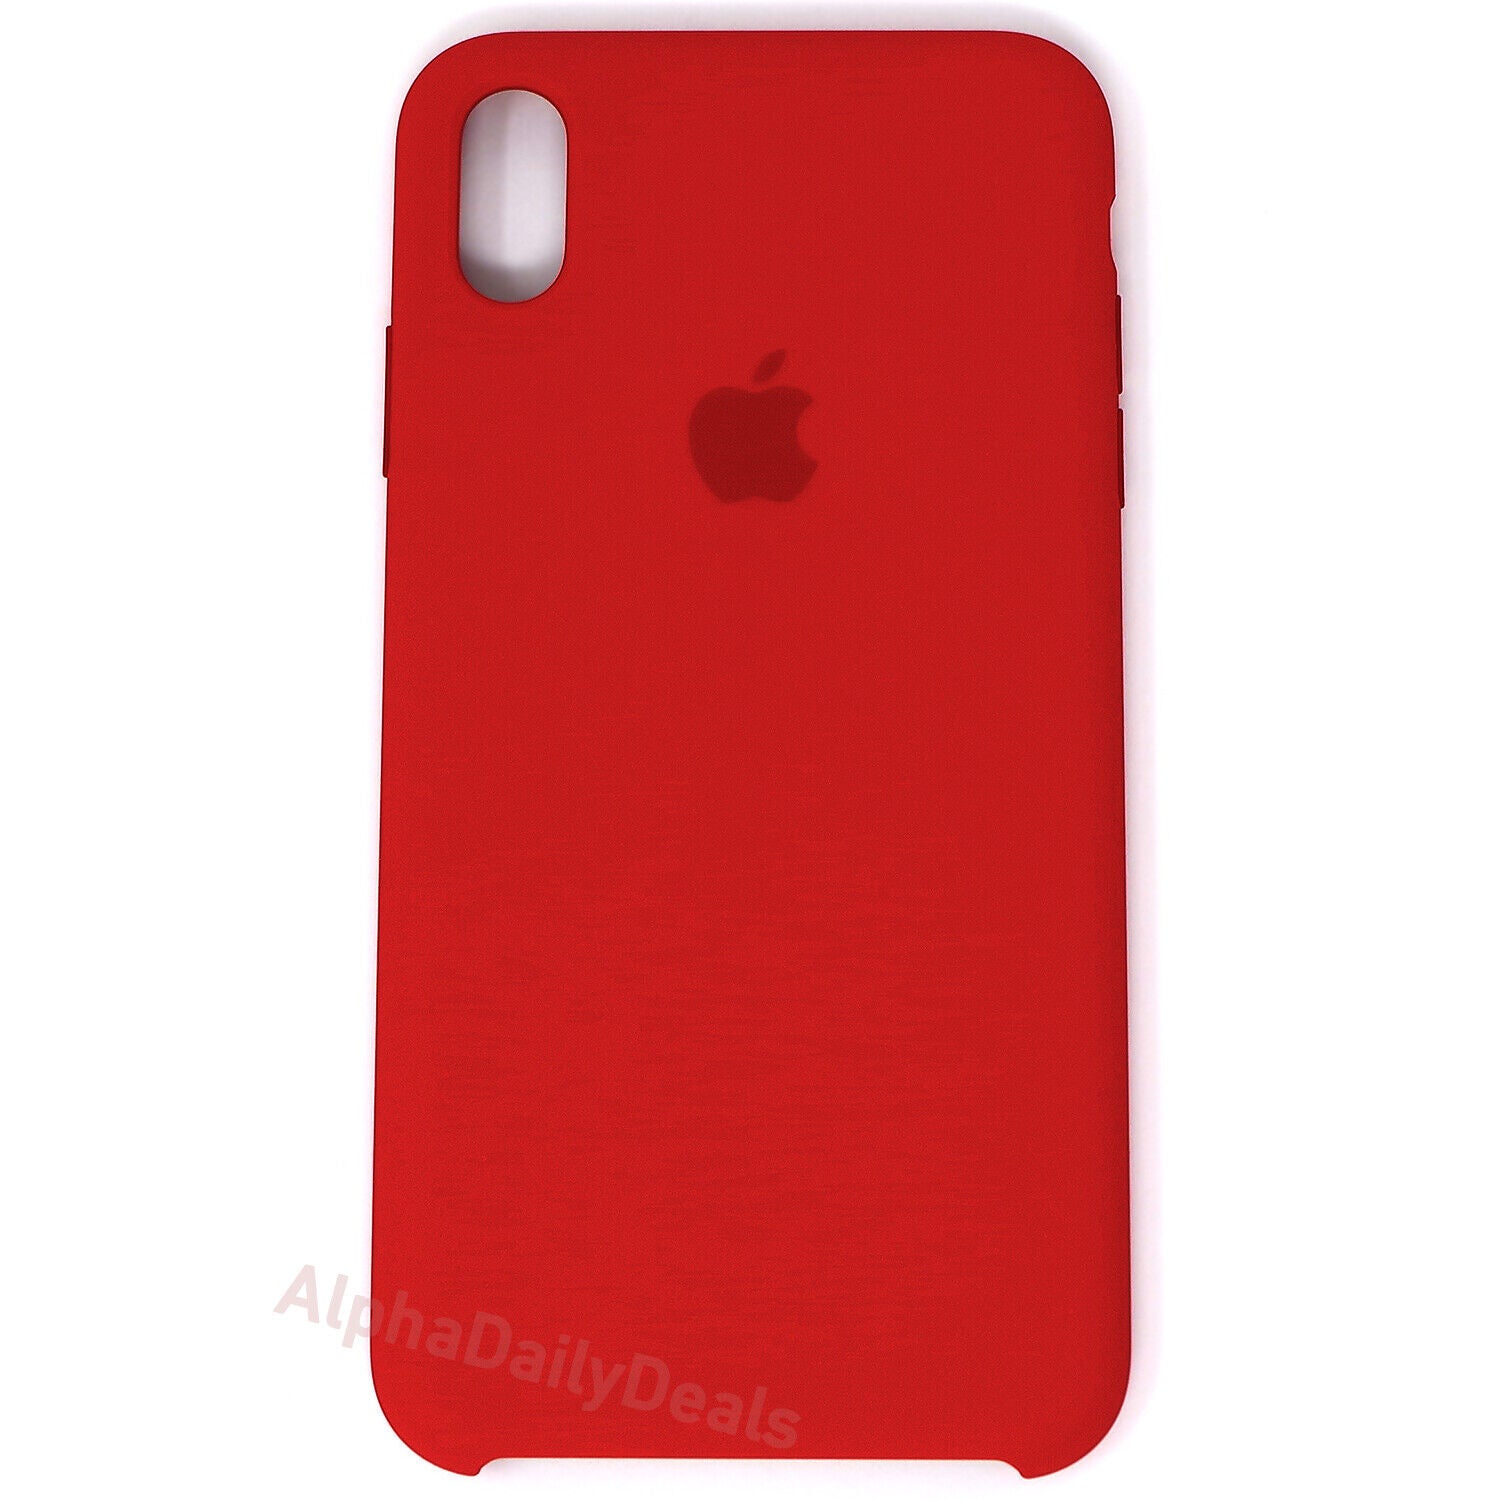 Genuine OEM Apple iPhone XS Max Silicone Case - Red